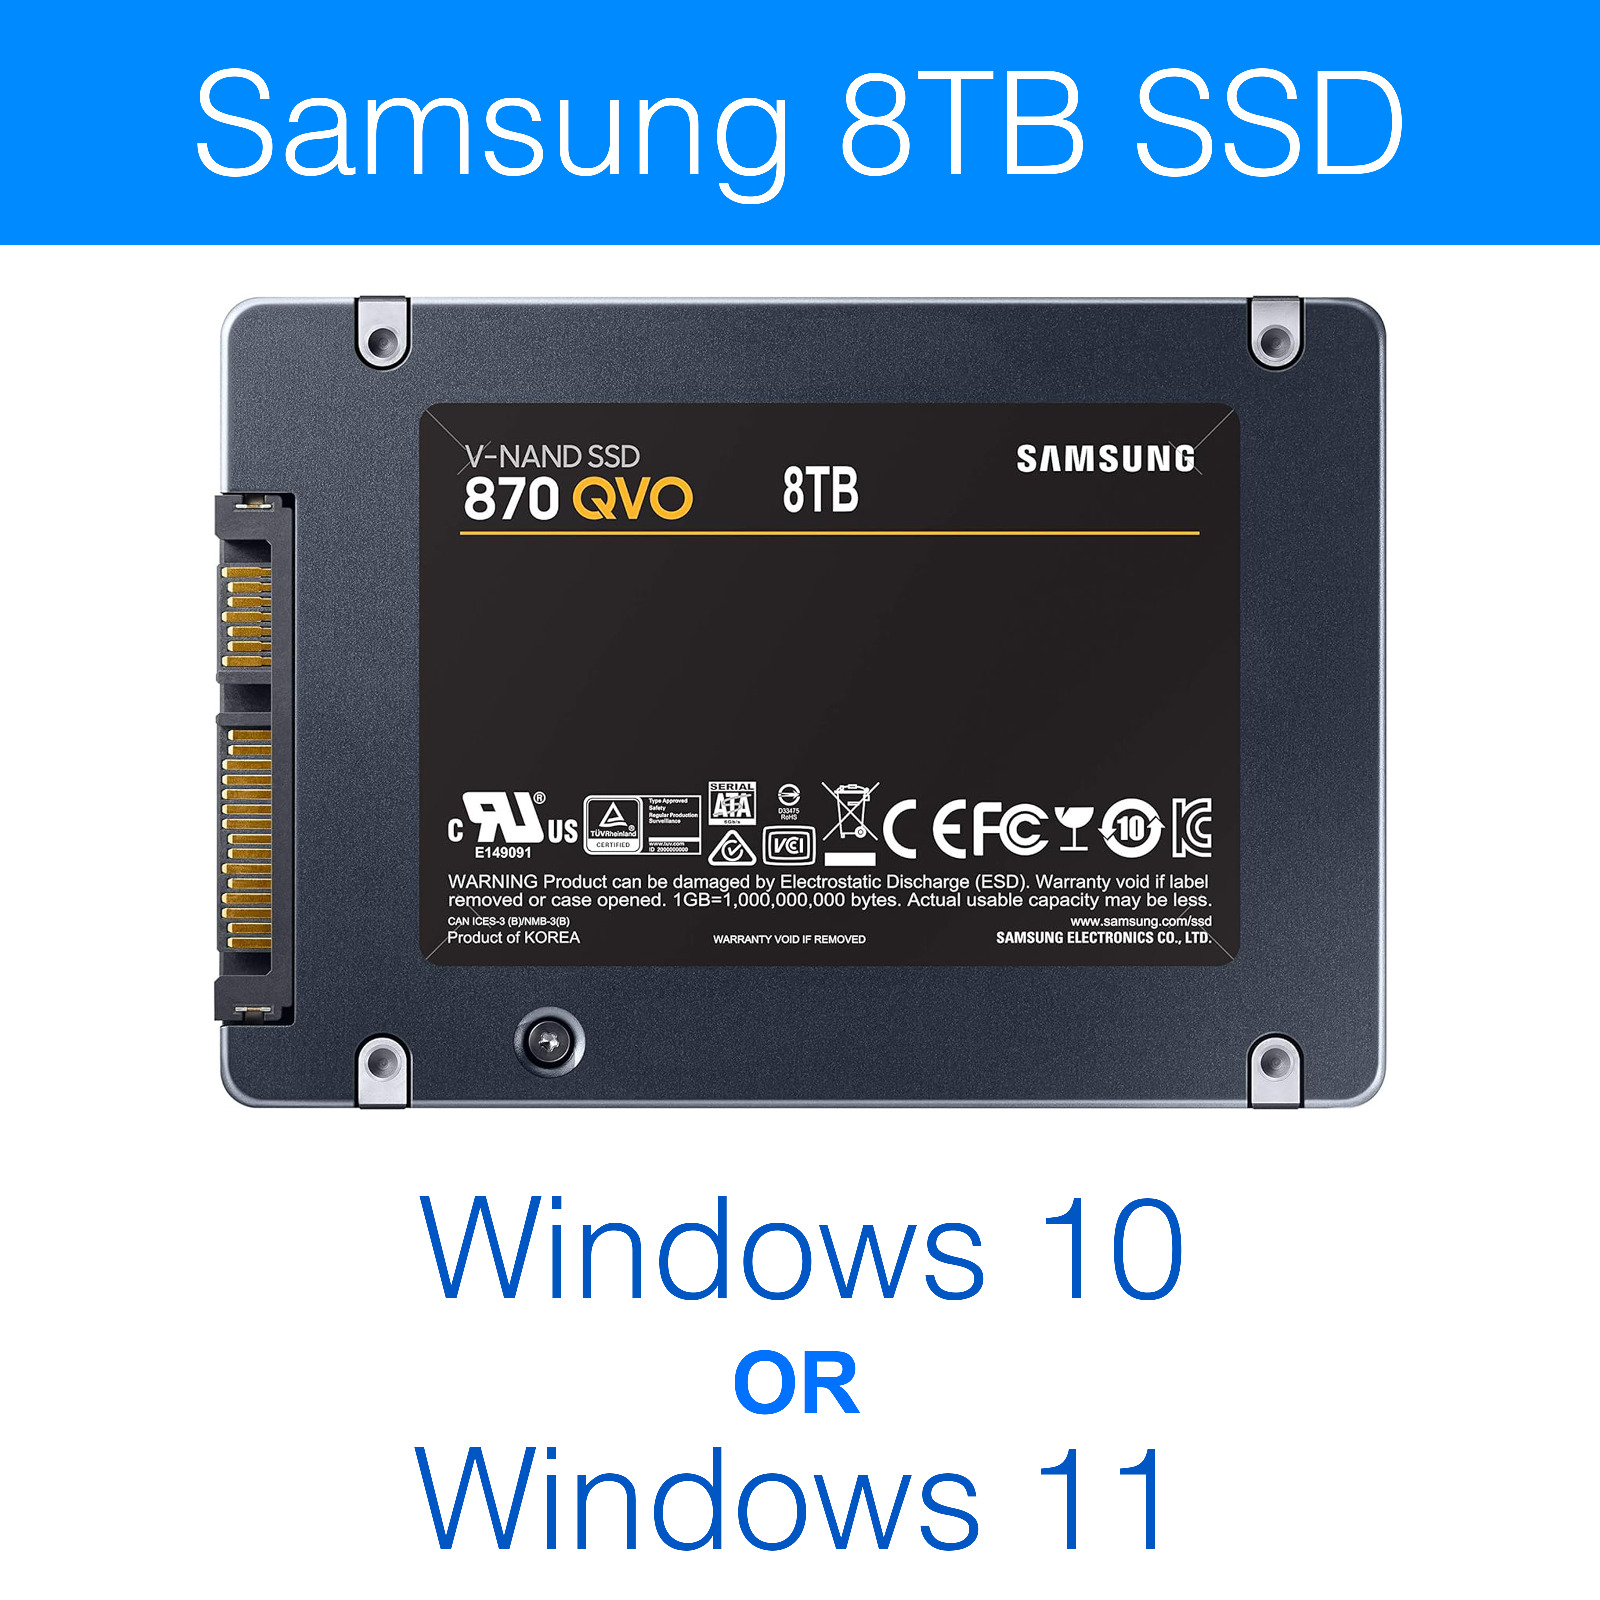 8TB Samsung 870 QVO SSD with Windows 10 or Windows 11 Pro/Home Installed 2.5